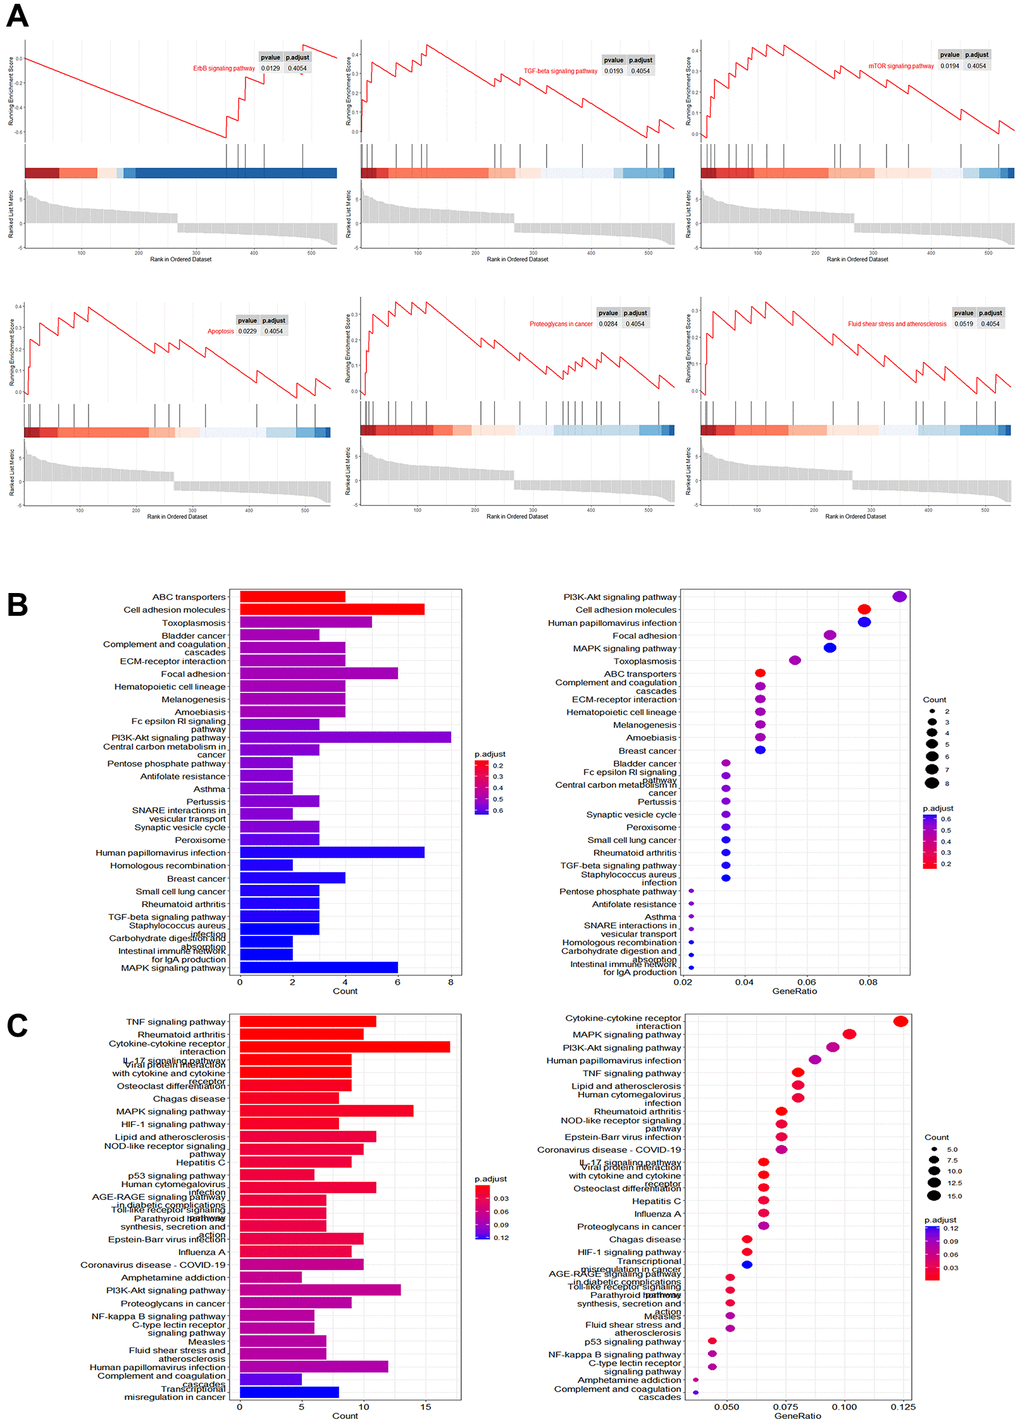 Pathway analysis of gene regulation by Mn2+ in macrophages. (A) GSEA of differentially expressed genes in Mn2+-treated group. (B) KEGG enrichment results of downregulated genes. (C) KEGG enrichment results of upregulated genes.